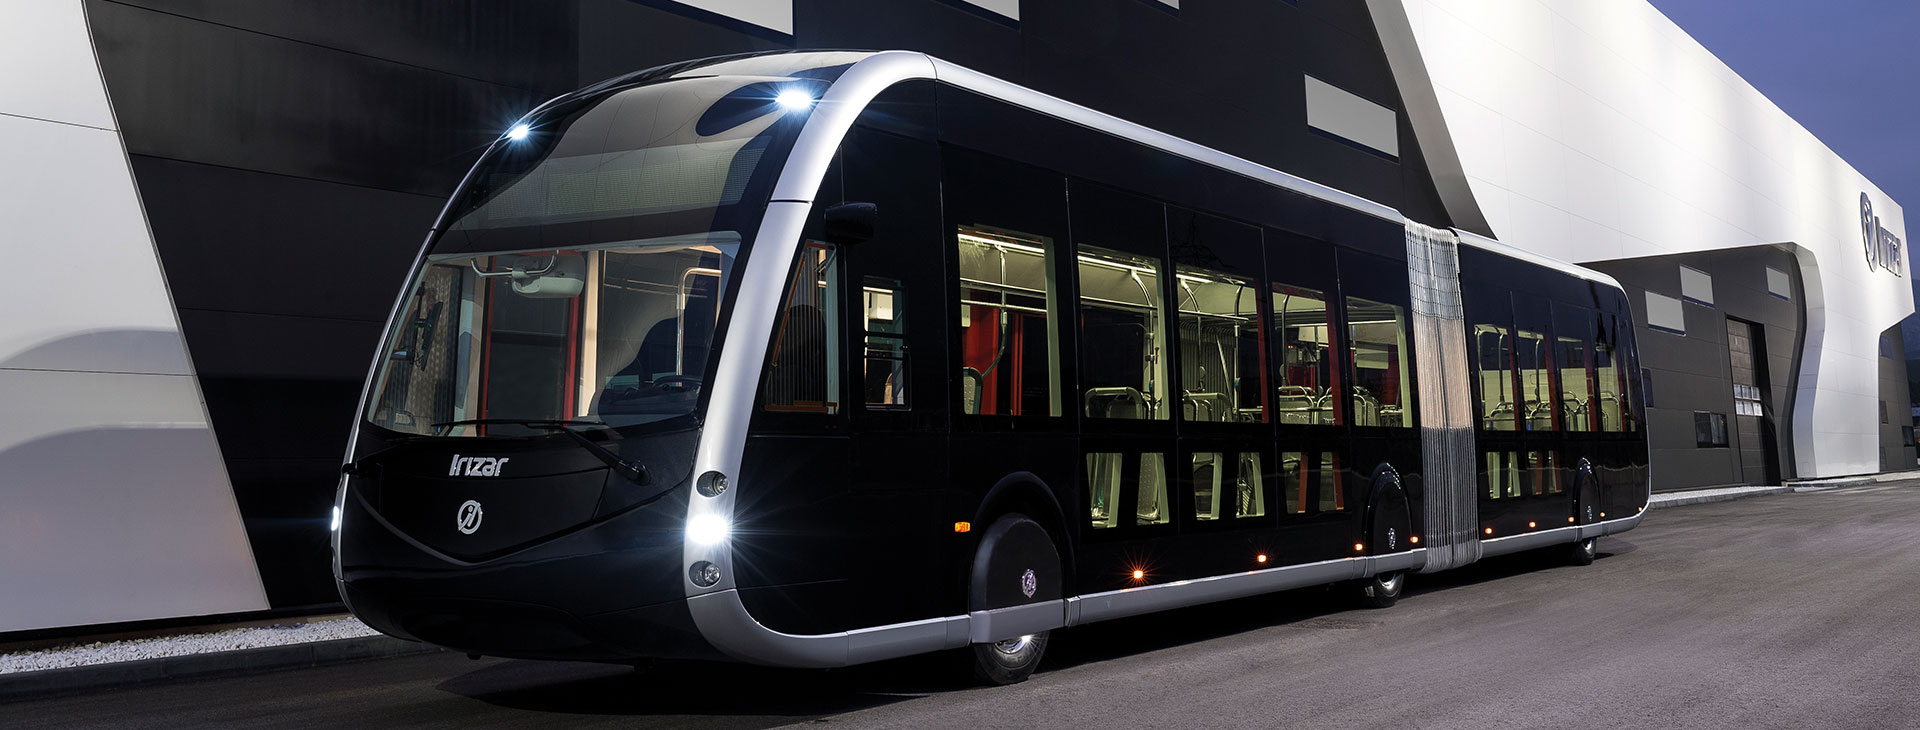 The Irizar ie tram, Irizar's 100% electric, zero emissions articulated bus, named 2018 Spanish Bus of the Year and Environmentally Friendly Industrial Vehicle of the Year